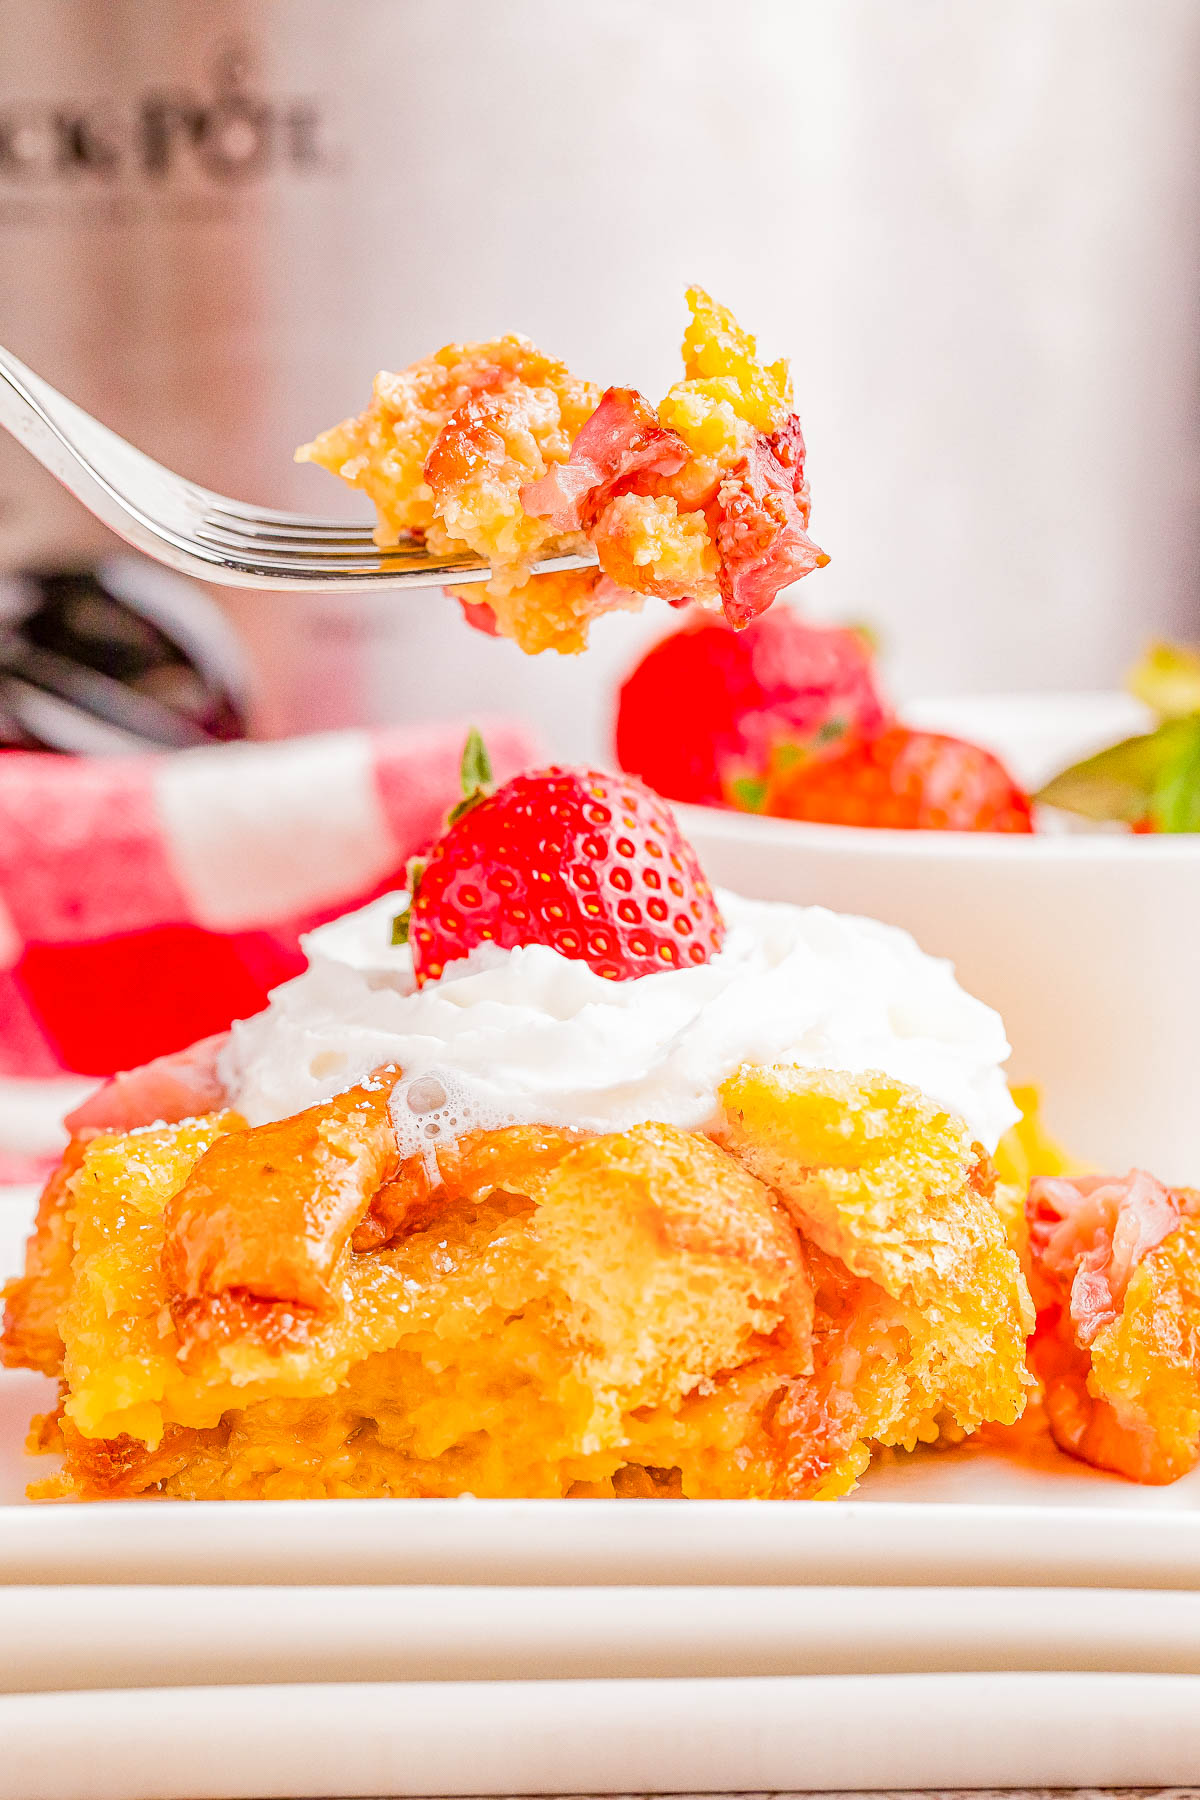 A fork holds a bite of strawberry bread pudding with a slice of cake topped with whipped cream and a strawberry on a plate below.